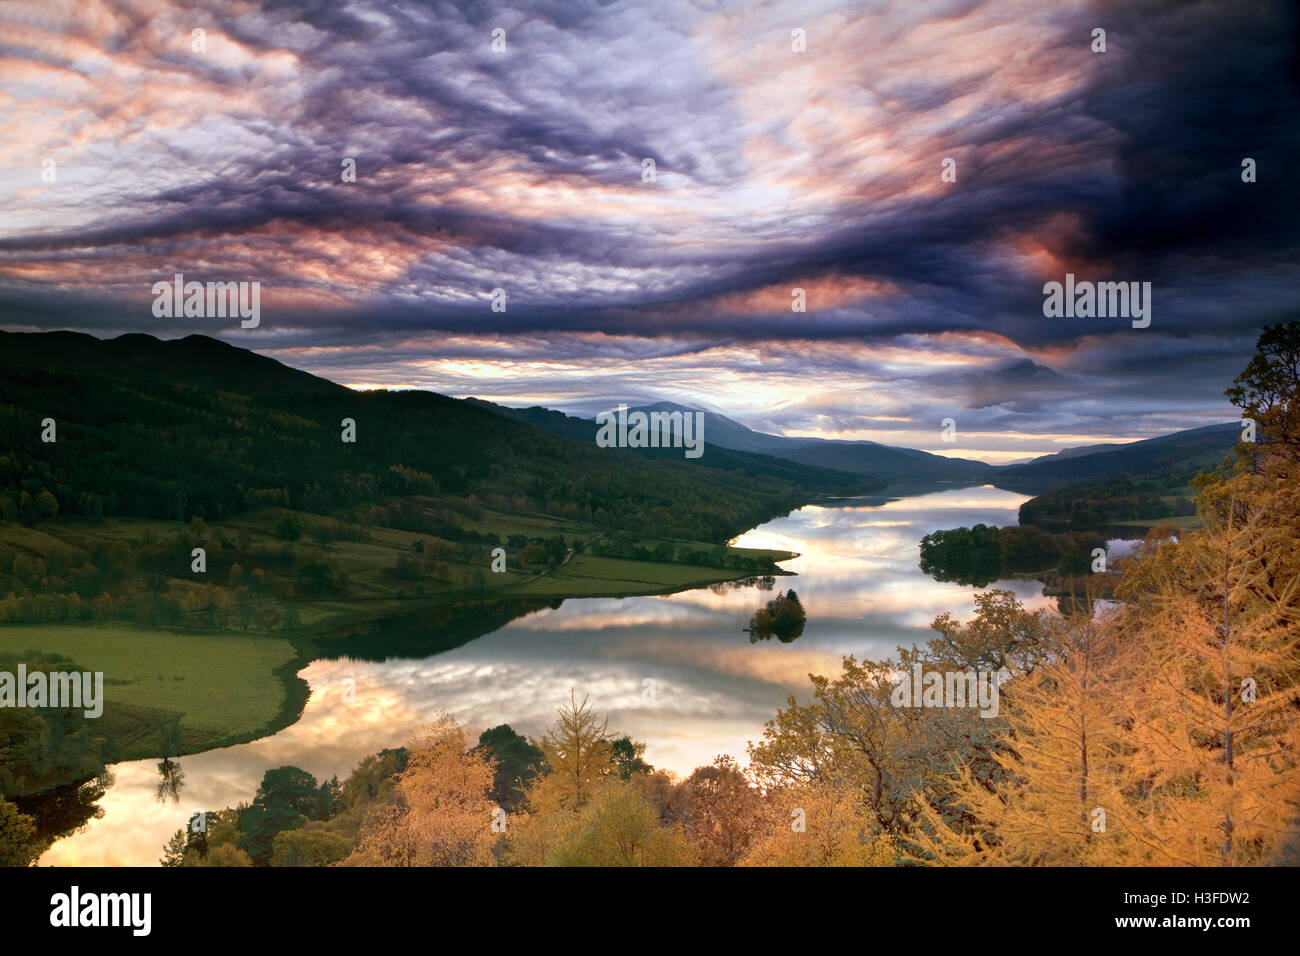 Dramatic sky over Queen's View, Loch Tummel, Perthshire, Scotland, UK Stock Photo